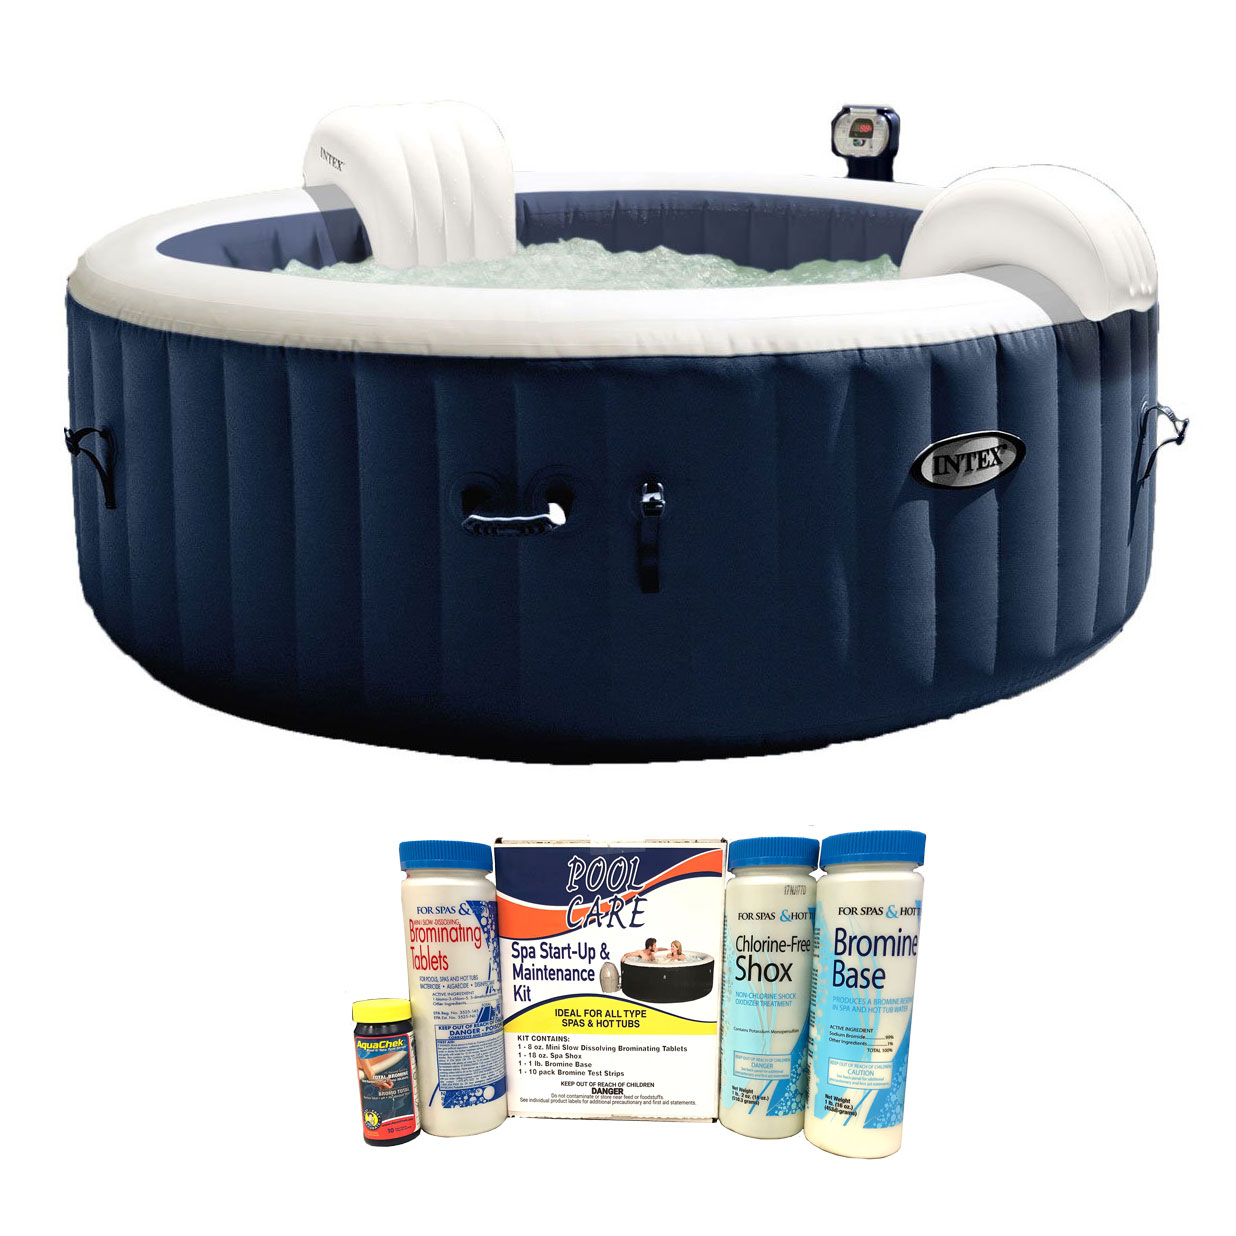 Details About Intex 28405e Pure Spa 4 Person Inflatable Hot Tub W Maintenance Kit Bromine